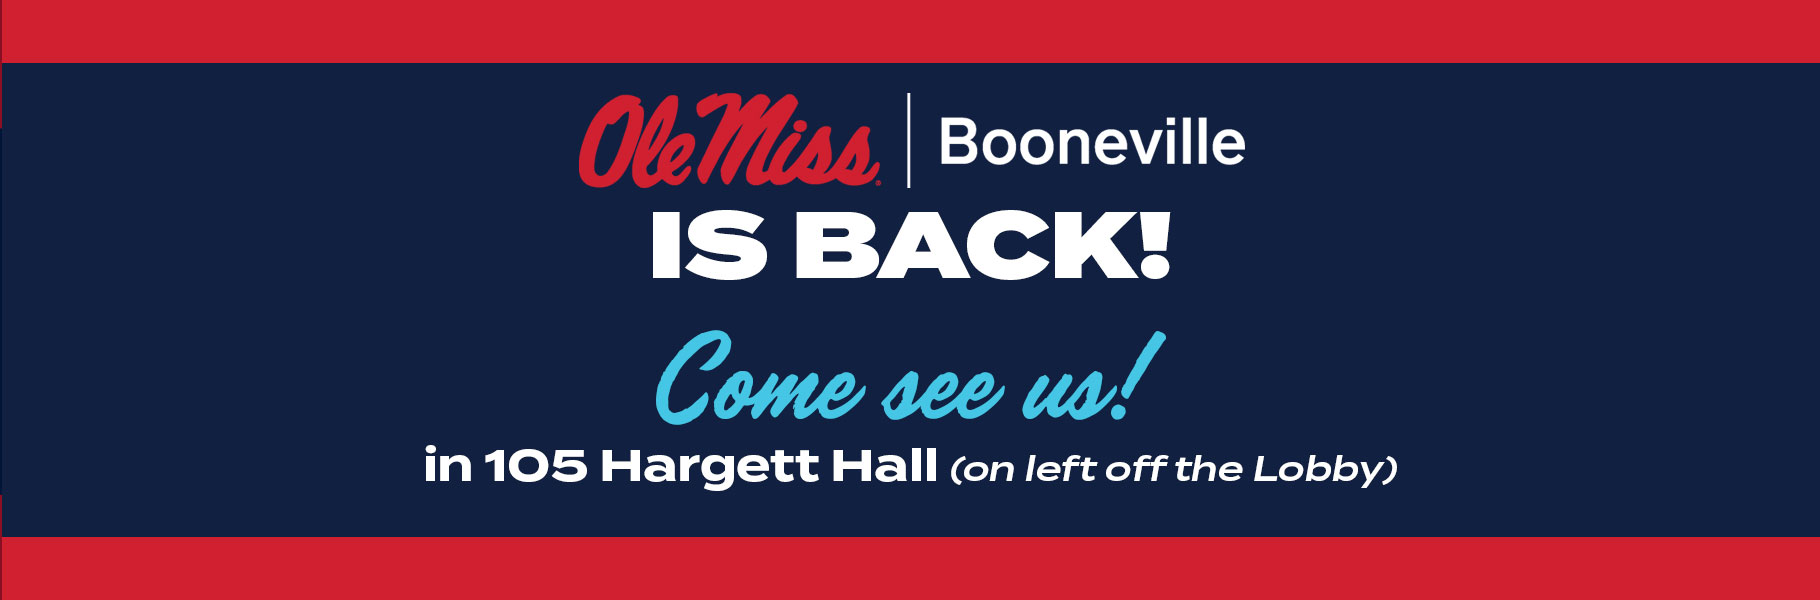 Booneville is back. Come see us at 105 Hargett Hall on the left of the lobby.